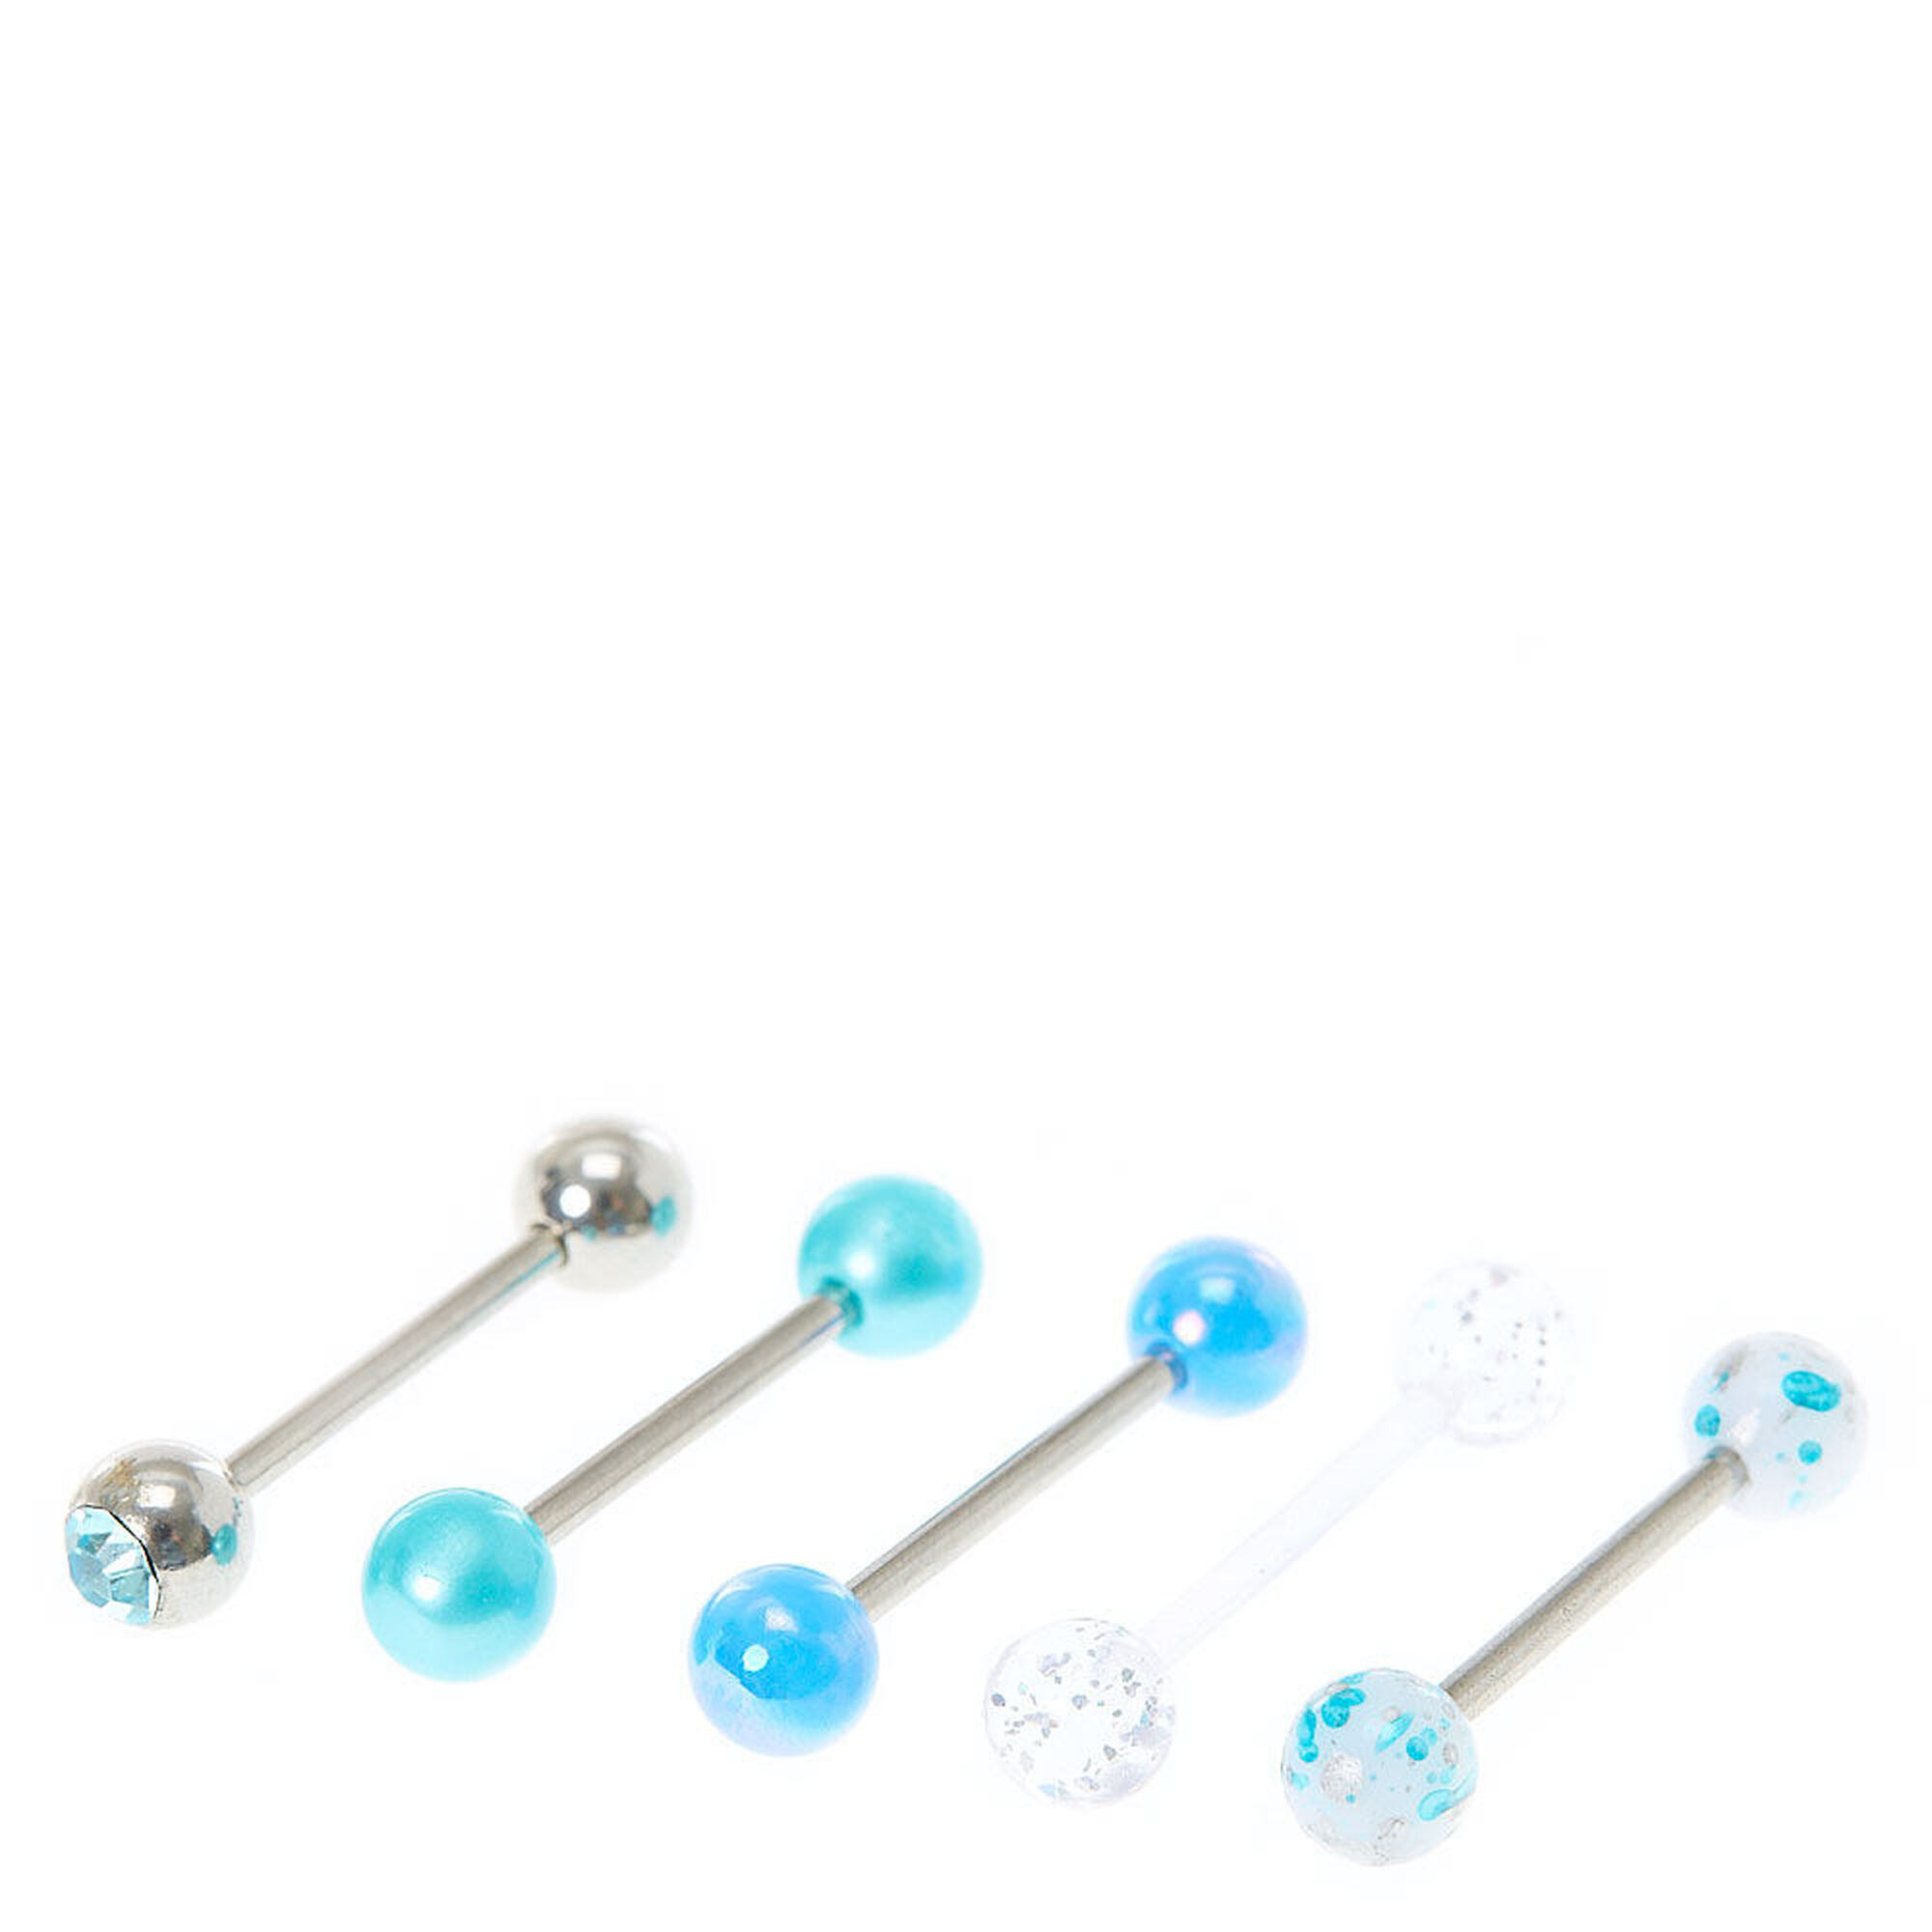 View Claires Aqua Barbell Tongue Rings 5 Pack Blue information